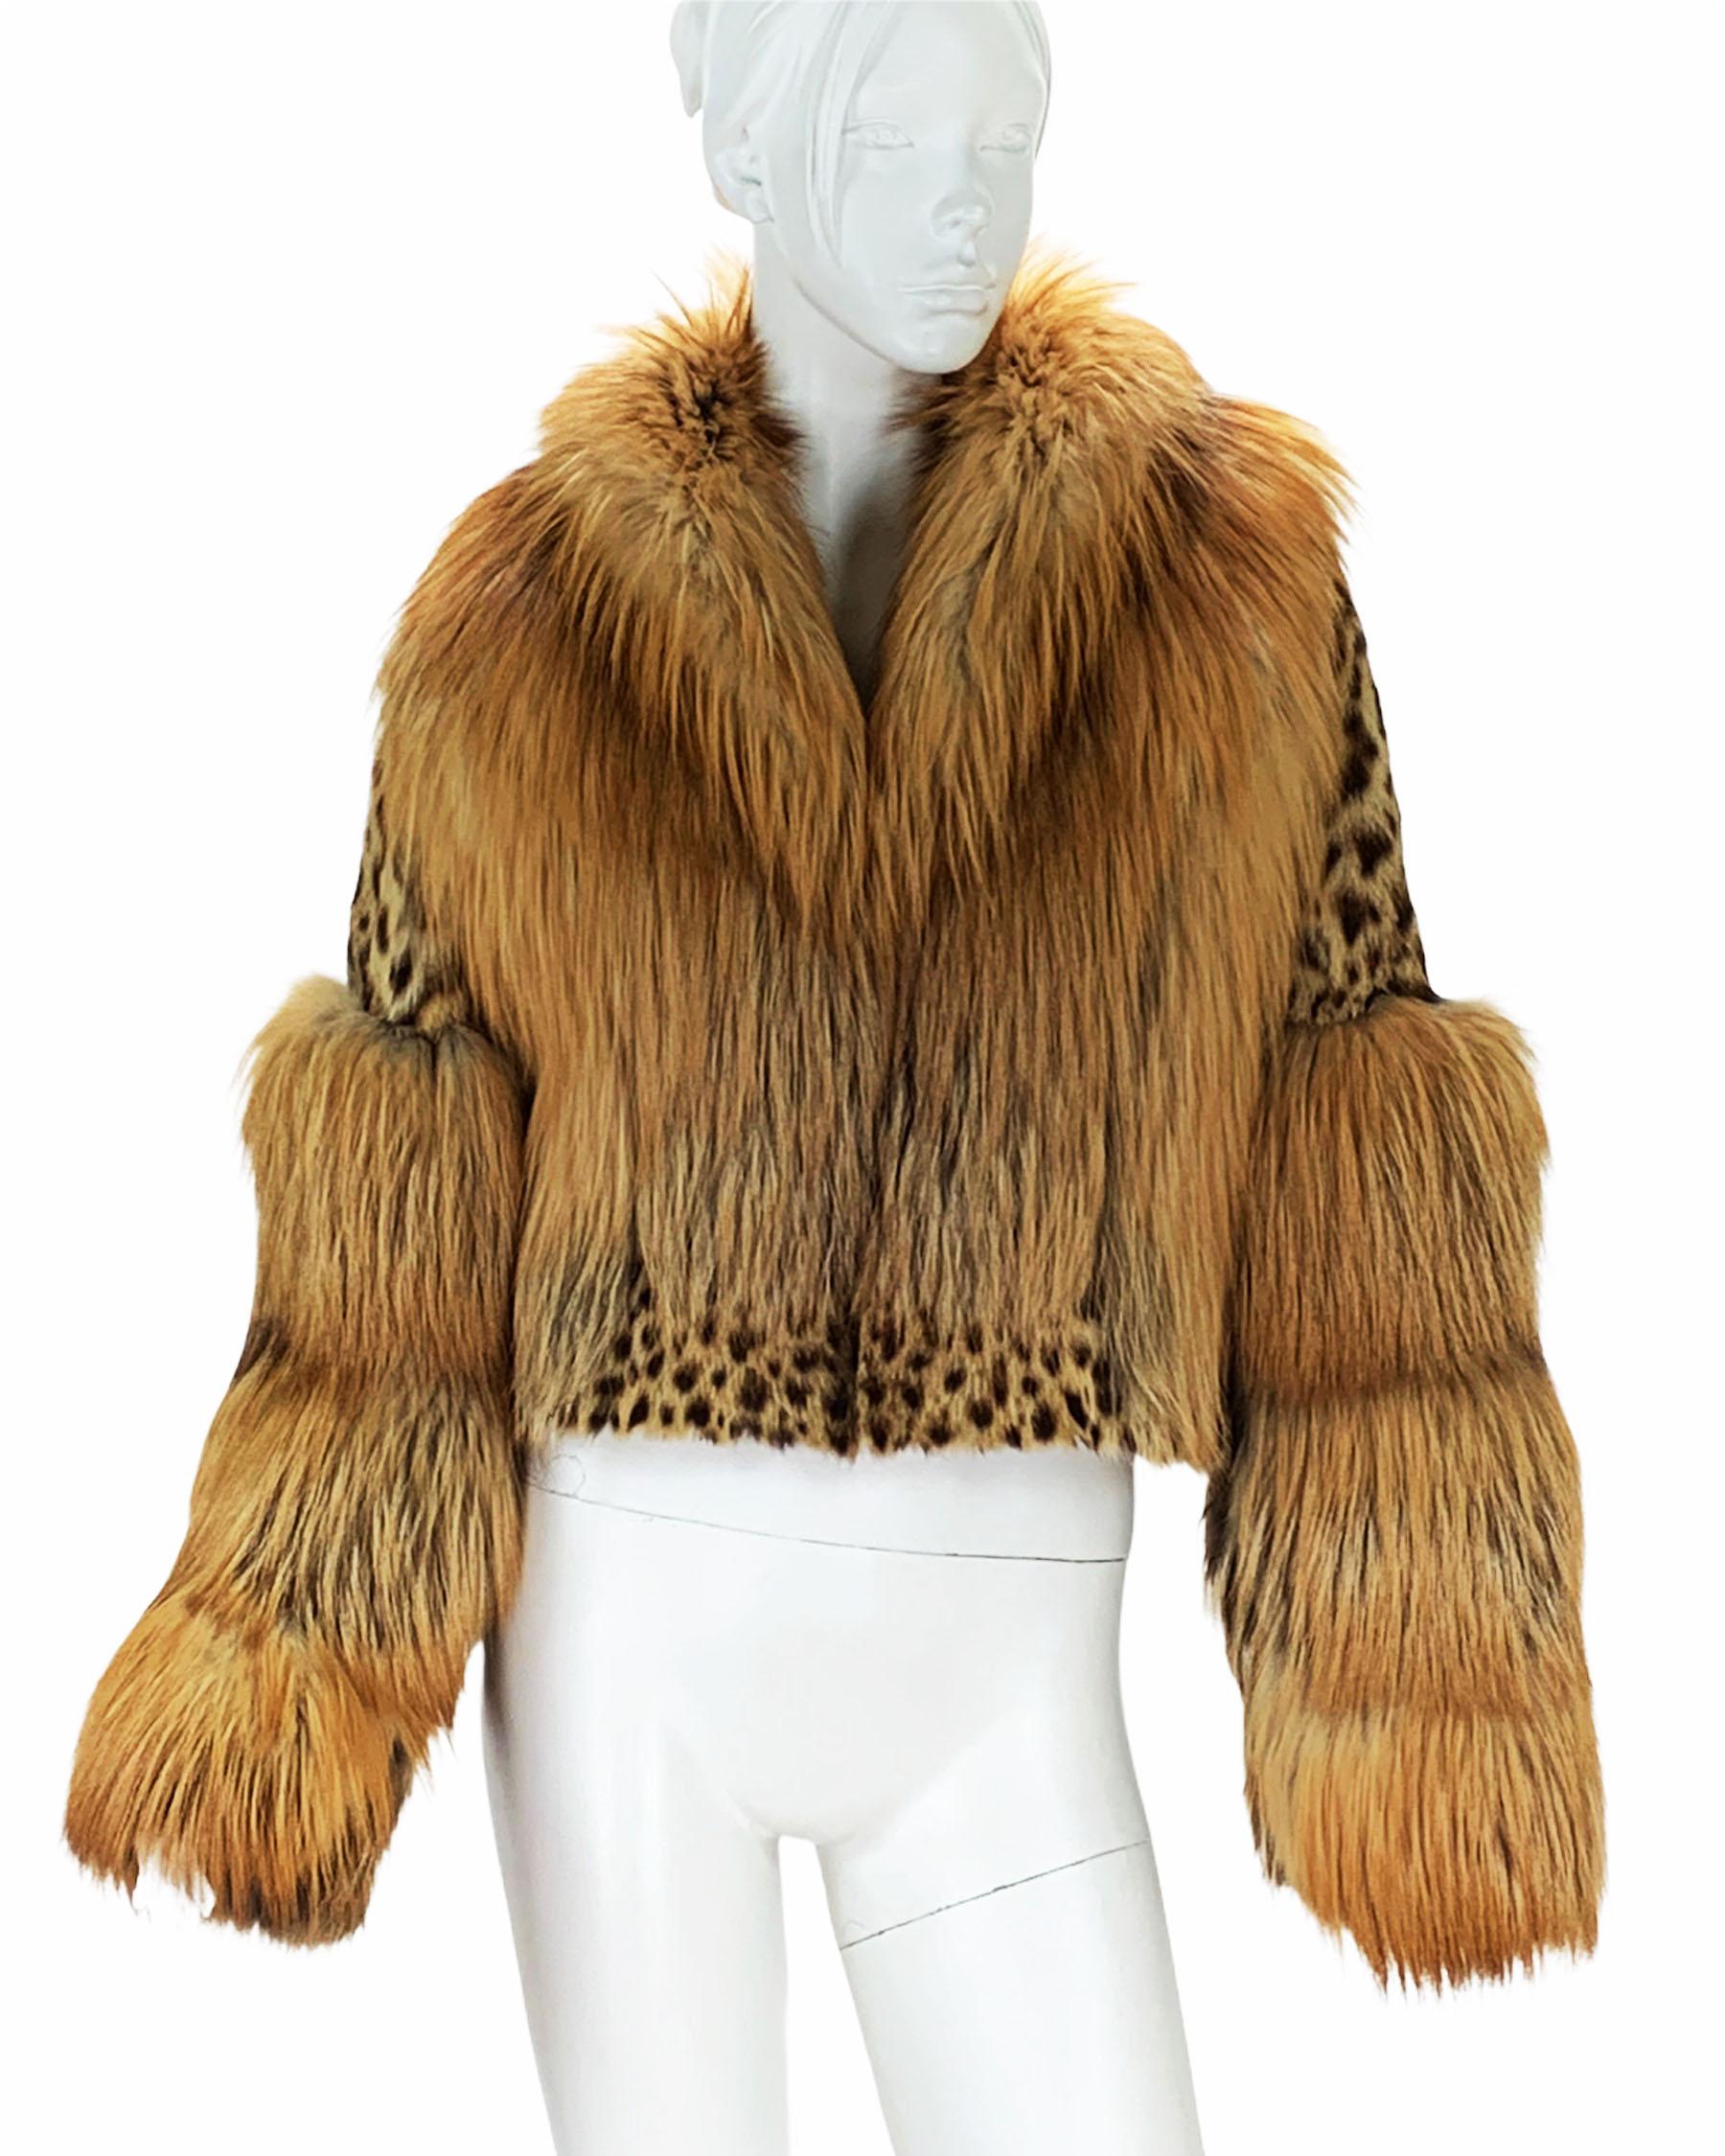 Museum Tom Ford for Gucci Runway F/W 1999 2 in 1 Fur Coat Jacket  For Sale 7